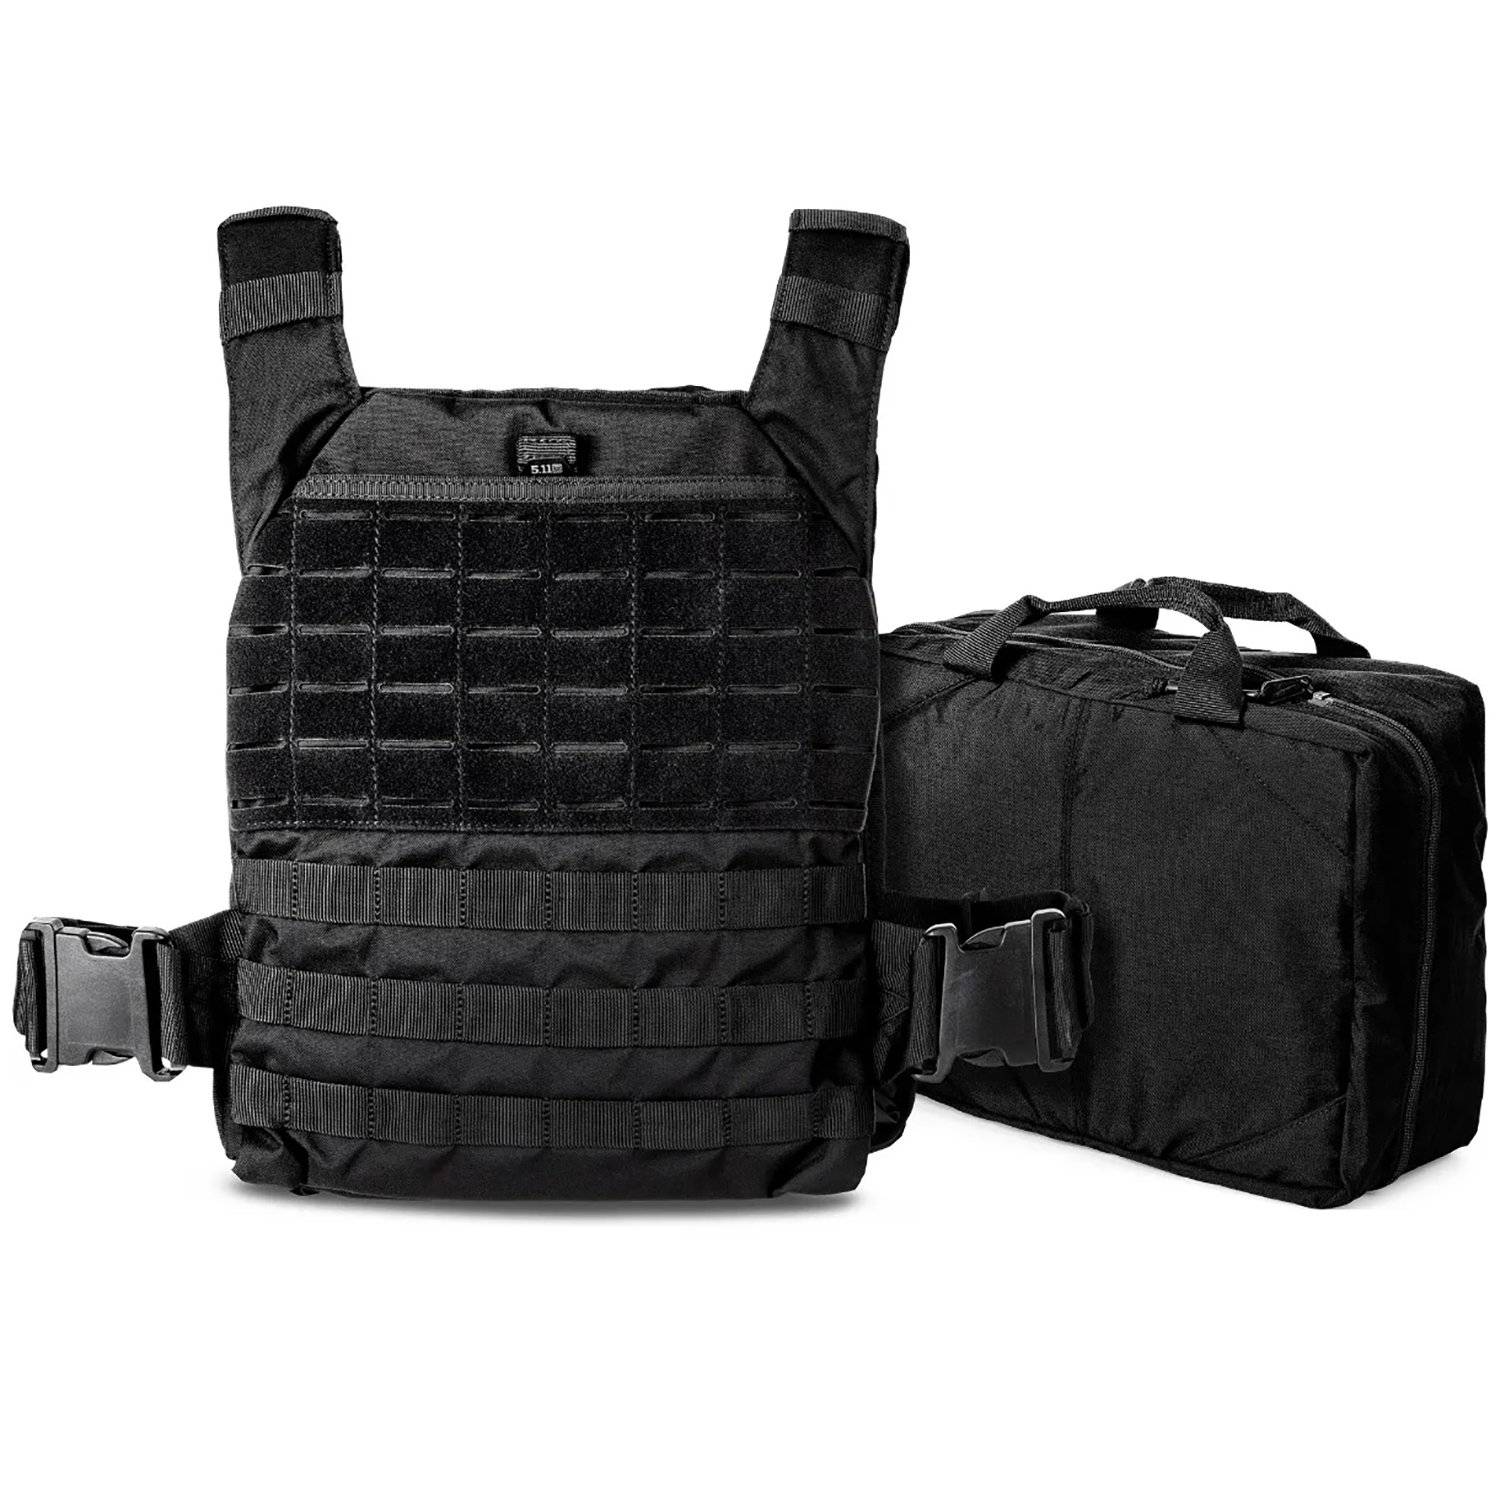 5.11 Tactical ABR Convertible Plate Carrier